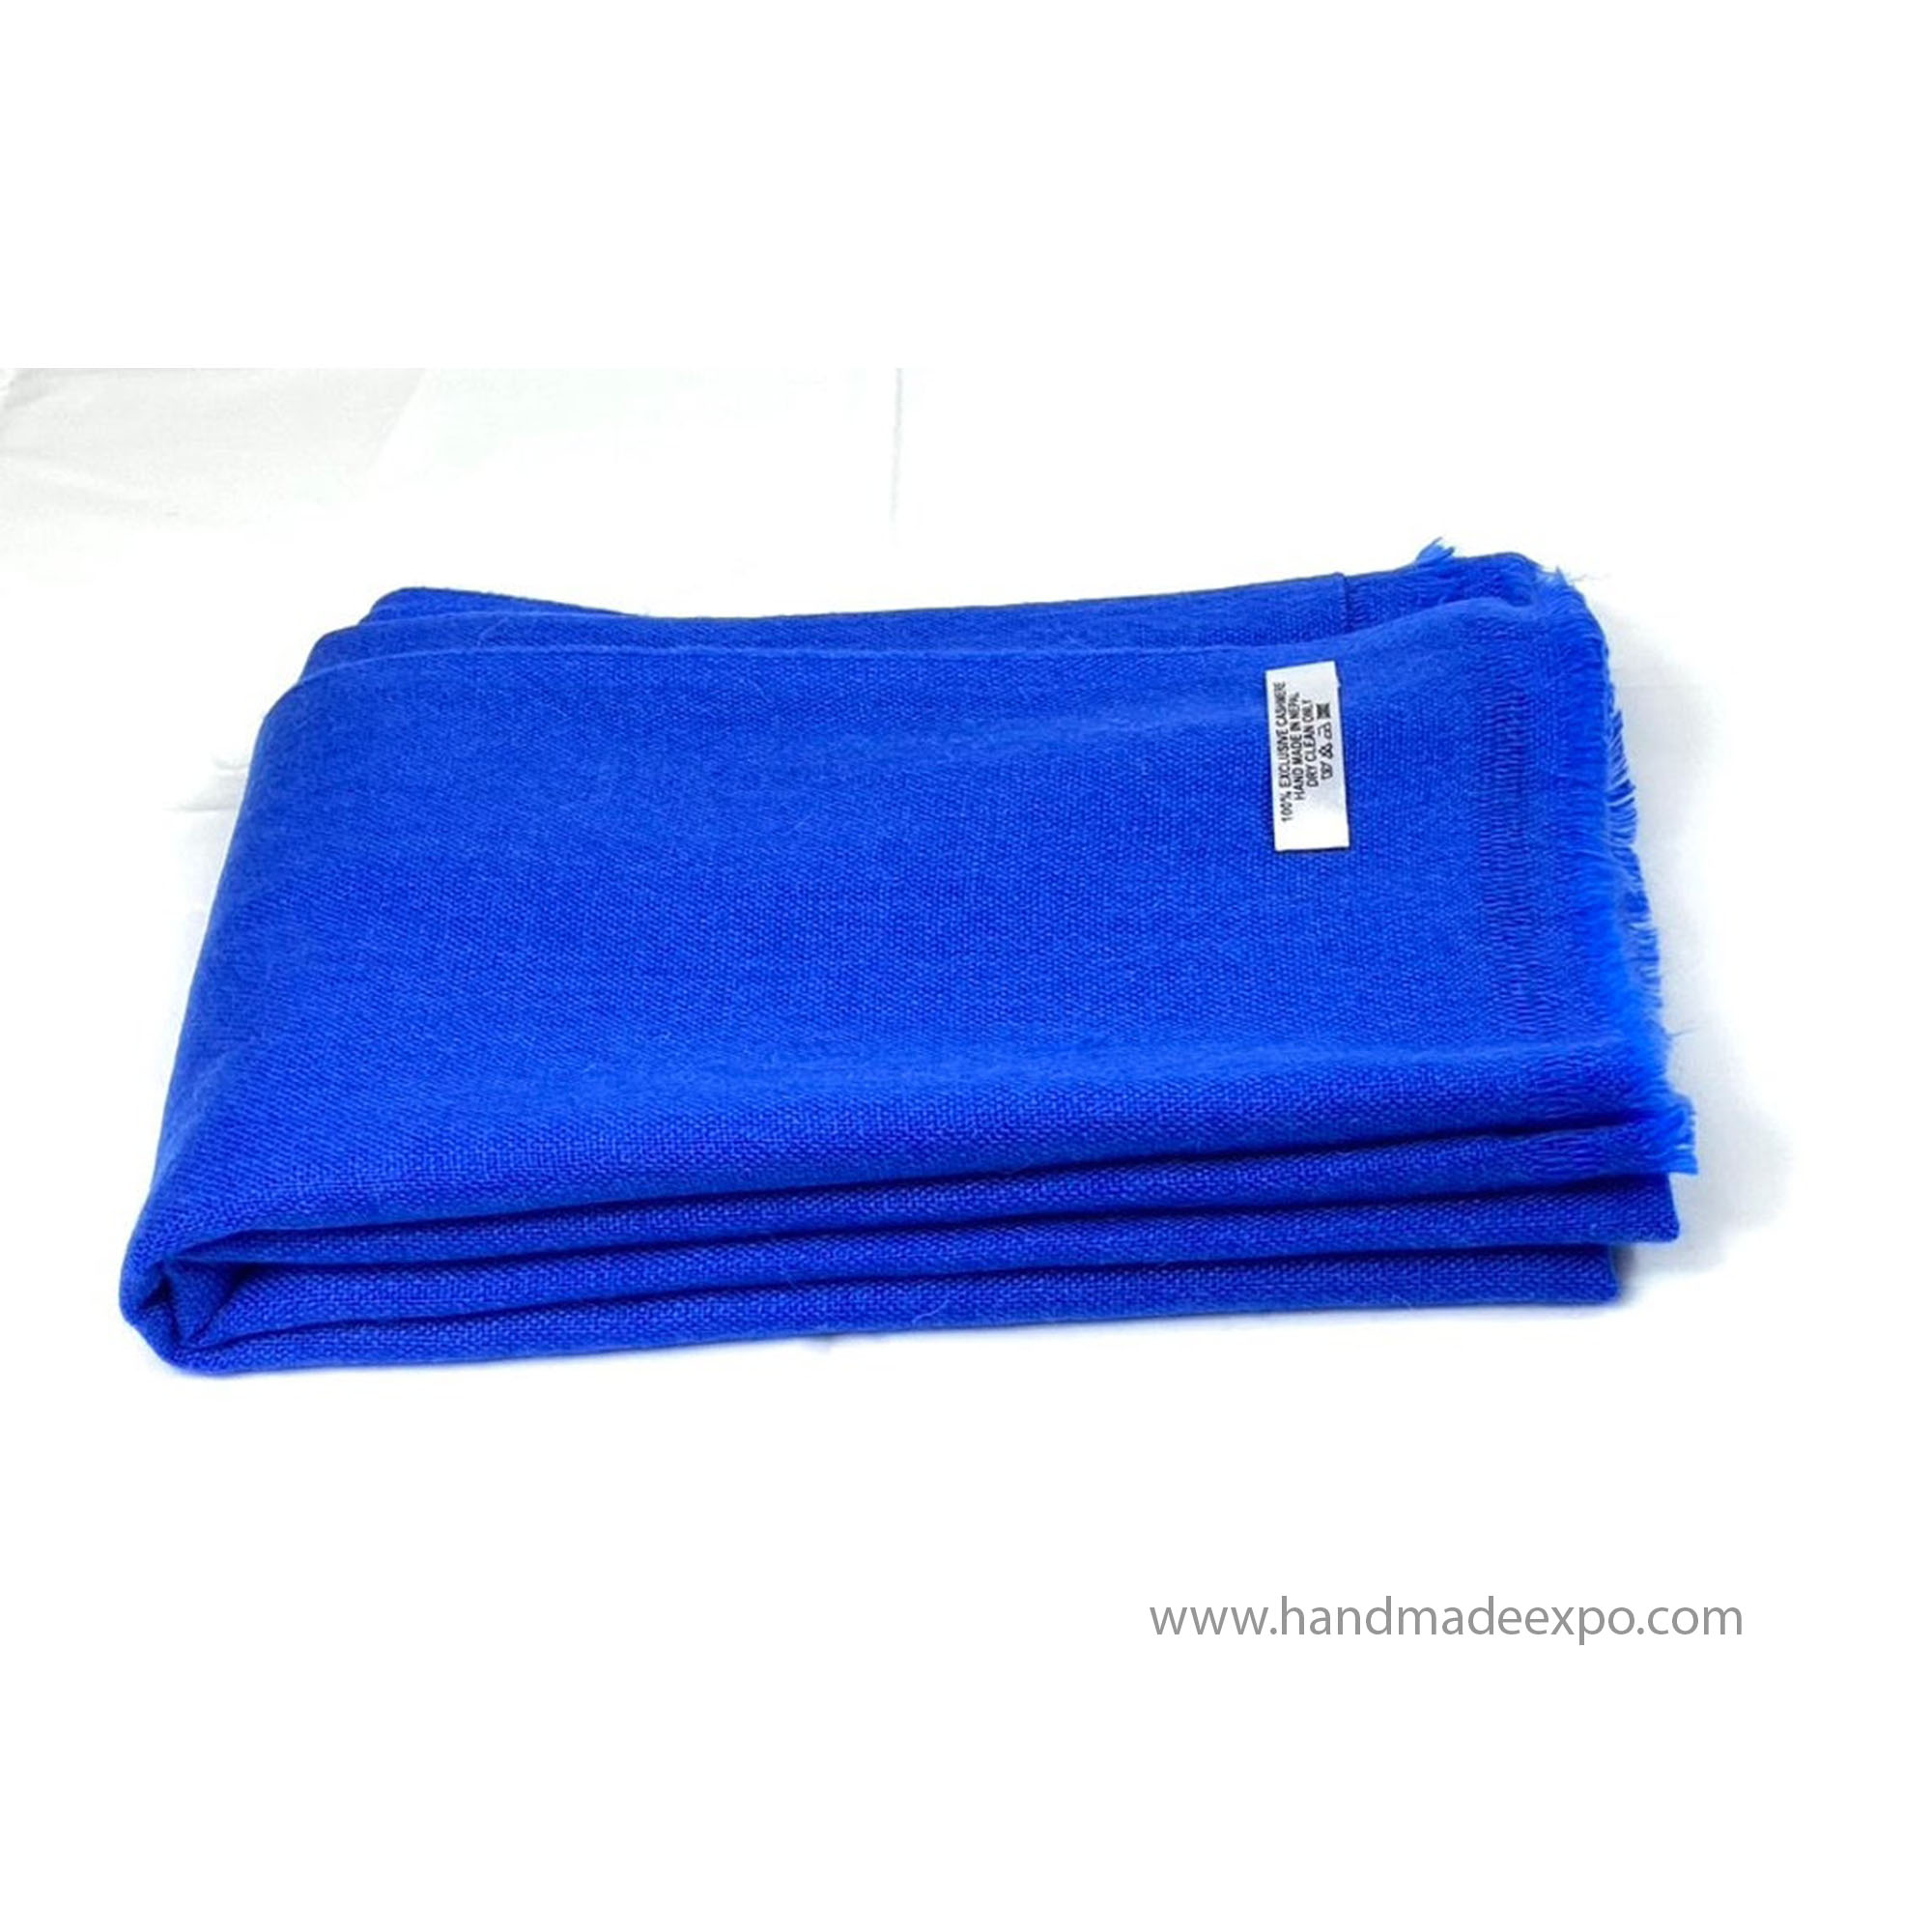 Pashmina Shawl, Nepali Handmade Shawl, In Four Ply Wool, Color Dye royal Blue Color